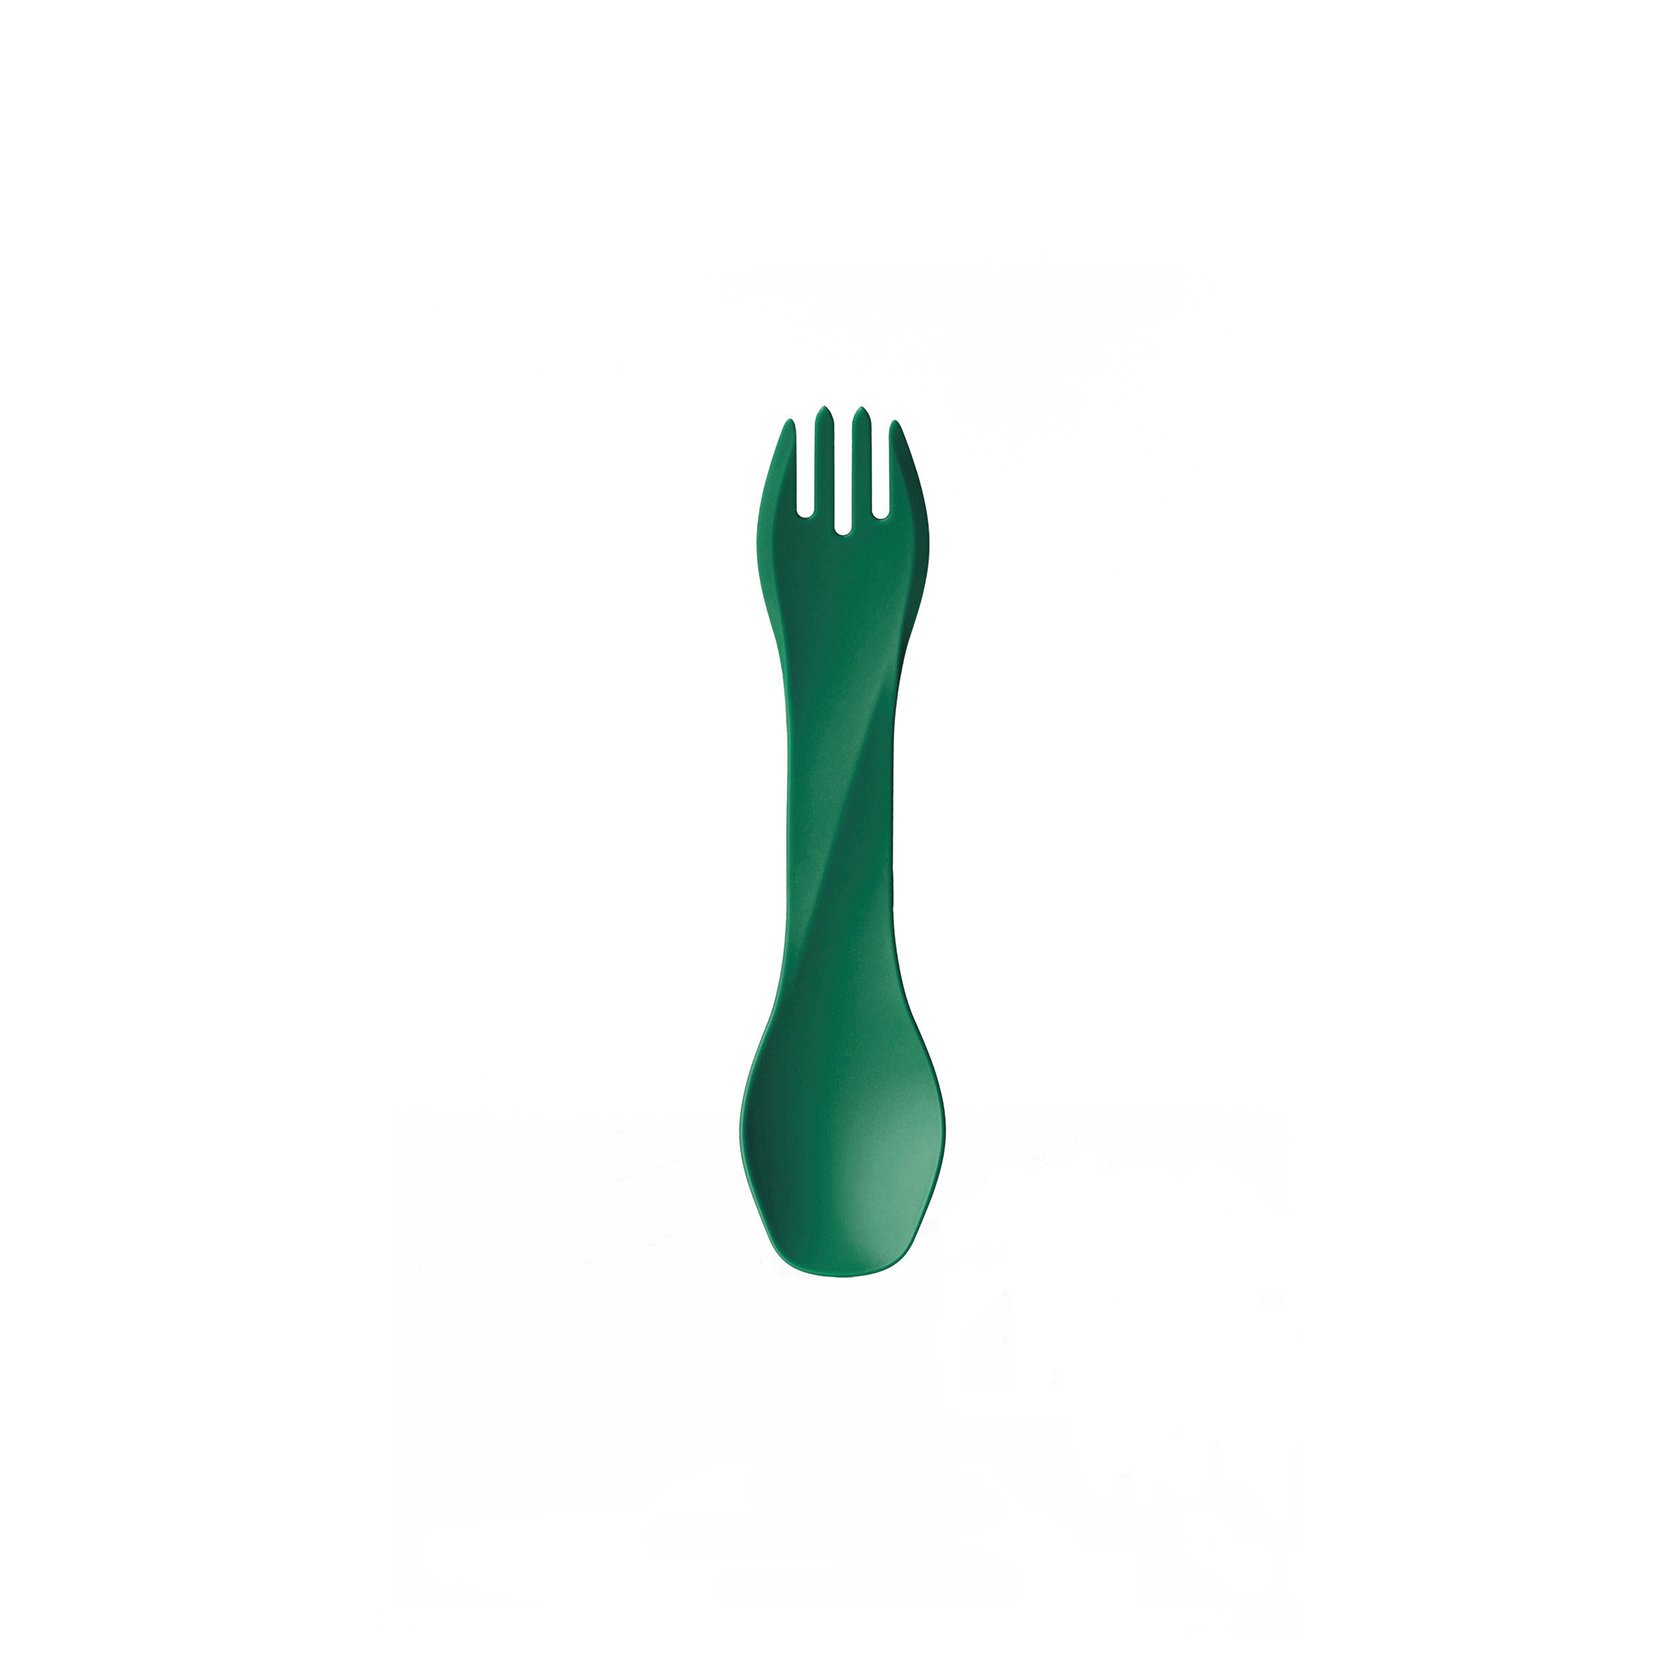 The civilized, miniature, combination fork and spoon (spork) -- the